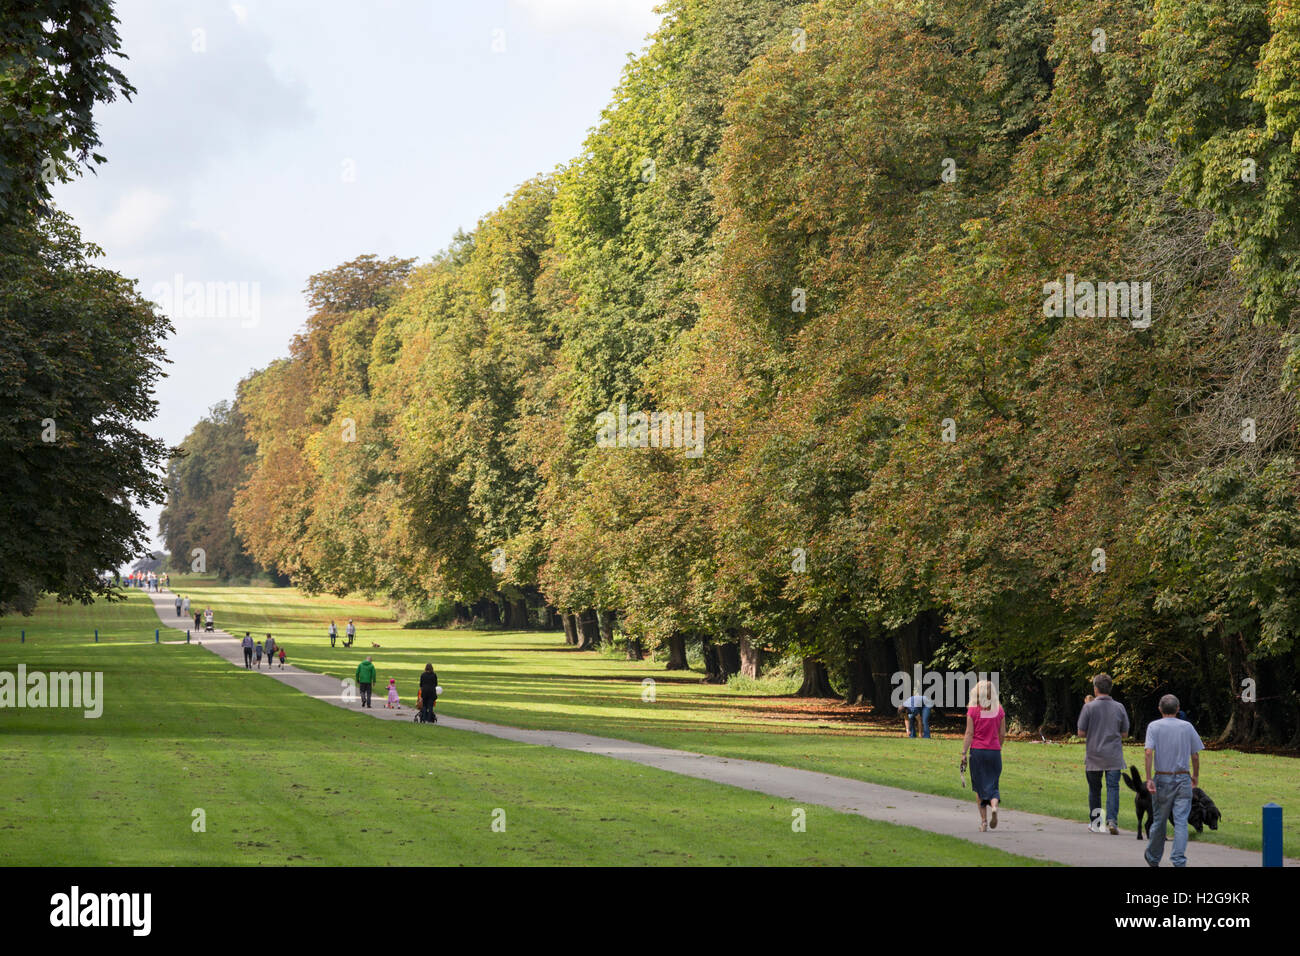 A late summer walk in Cirencester Park, Cirencester, Gloucestershire, England, UK Stock Photo